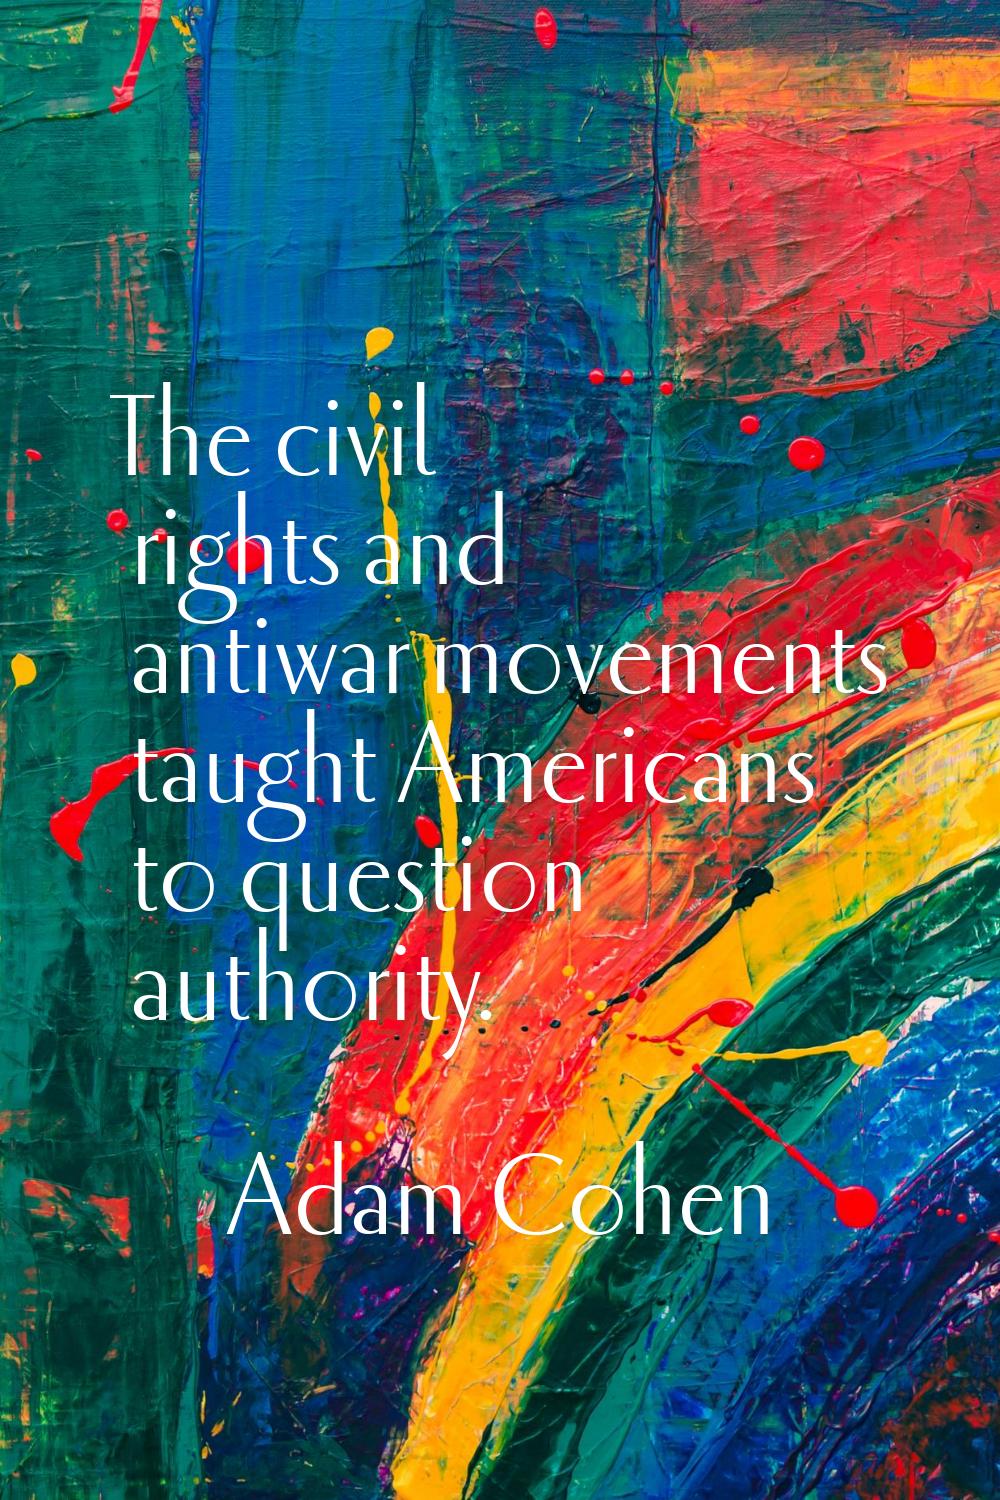 The civil rights and antiwar movements taught Americans to question authority.